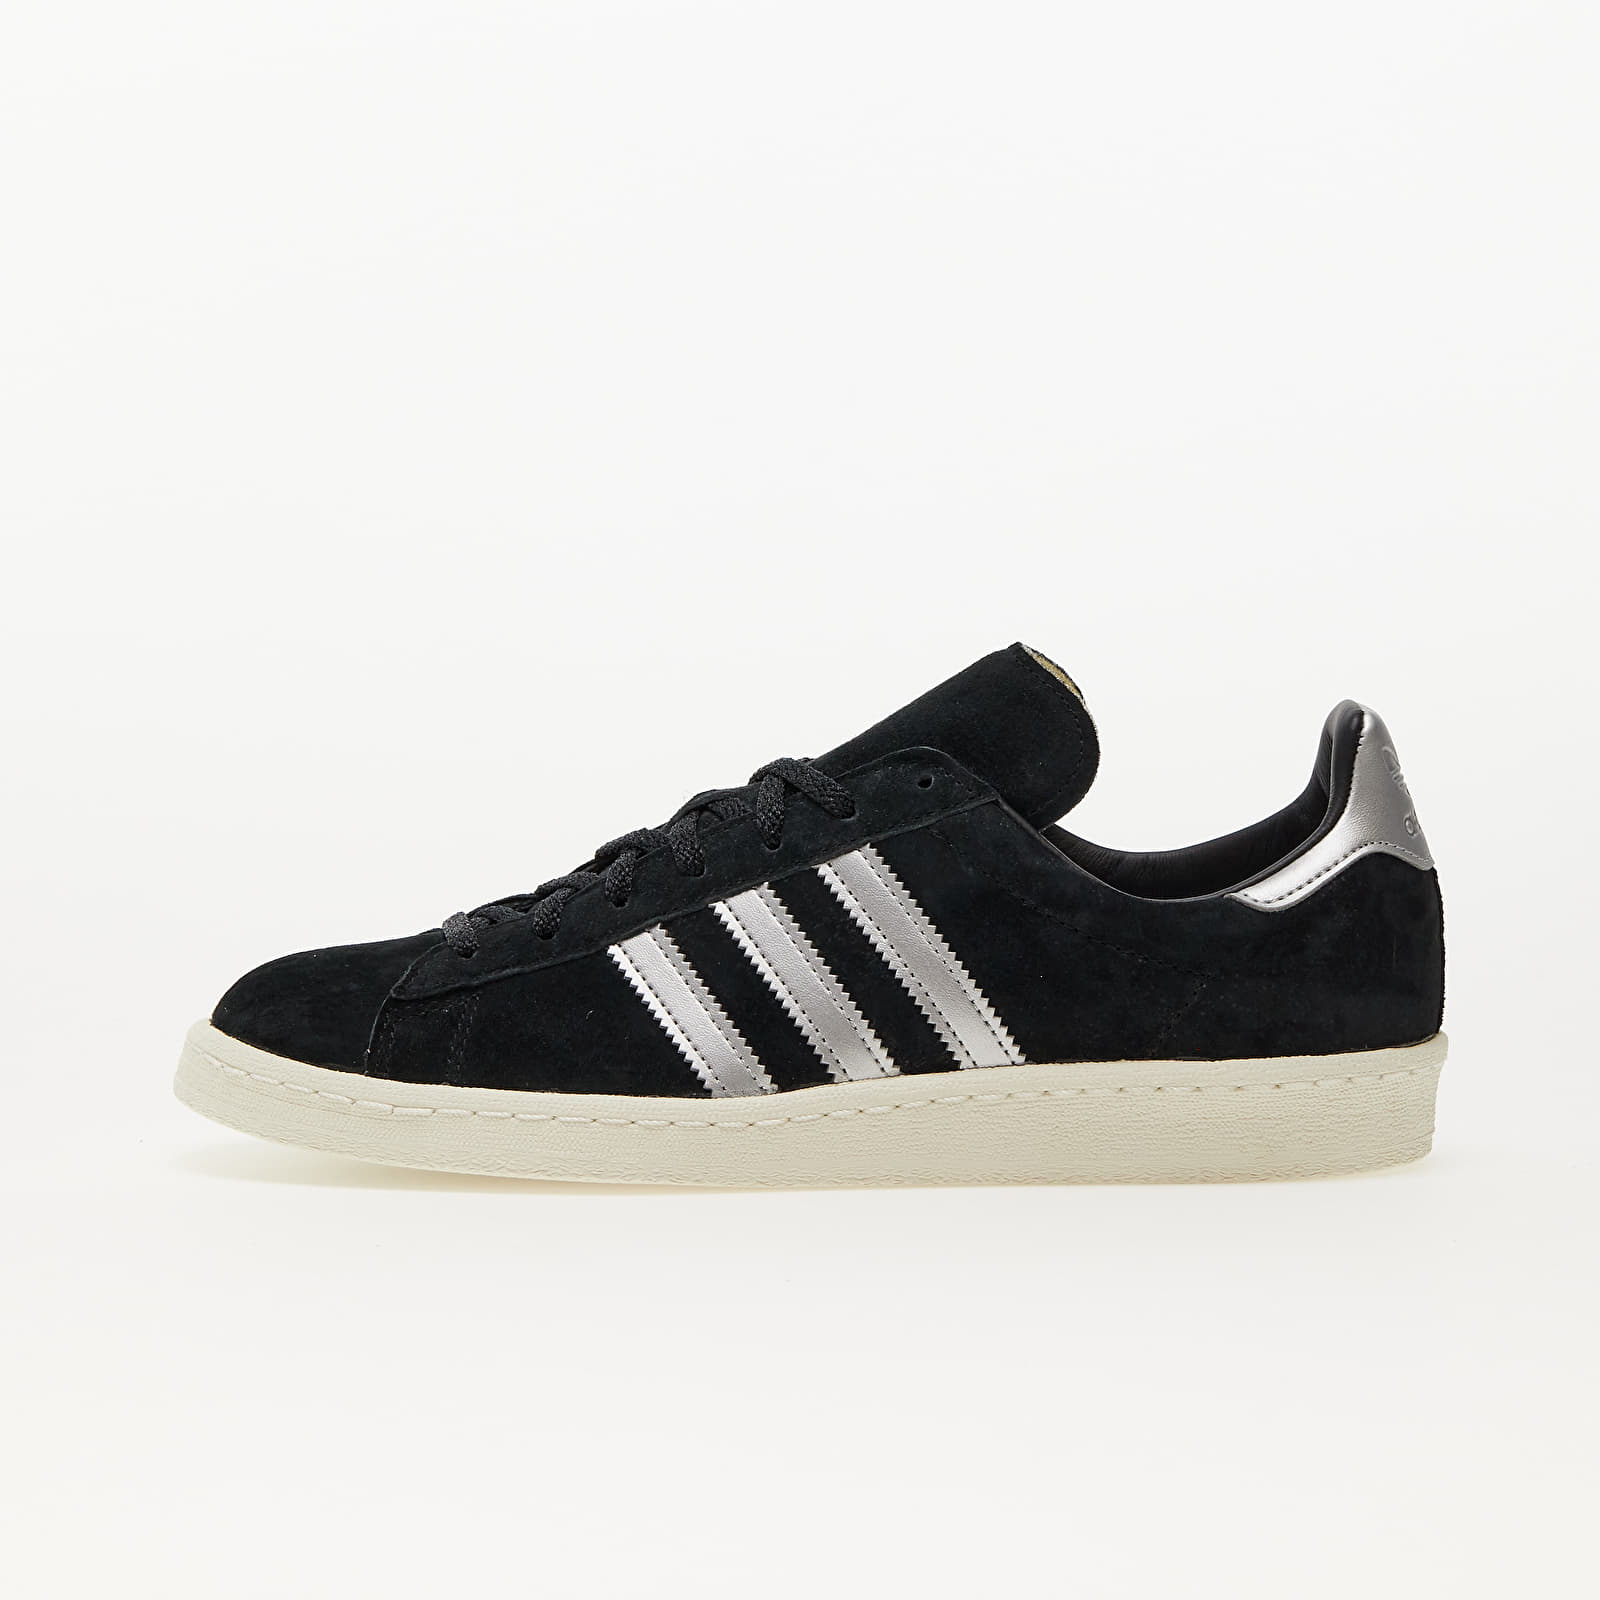 Chaussures et baskets homme adidas Campus 80s Core Black/ Ftw White/ Off White